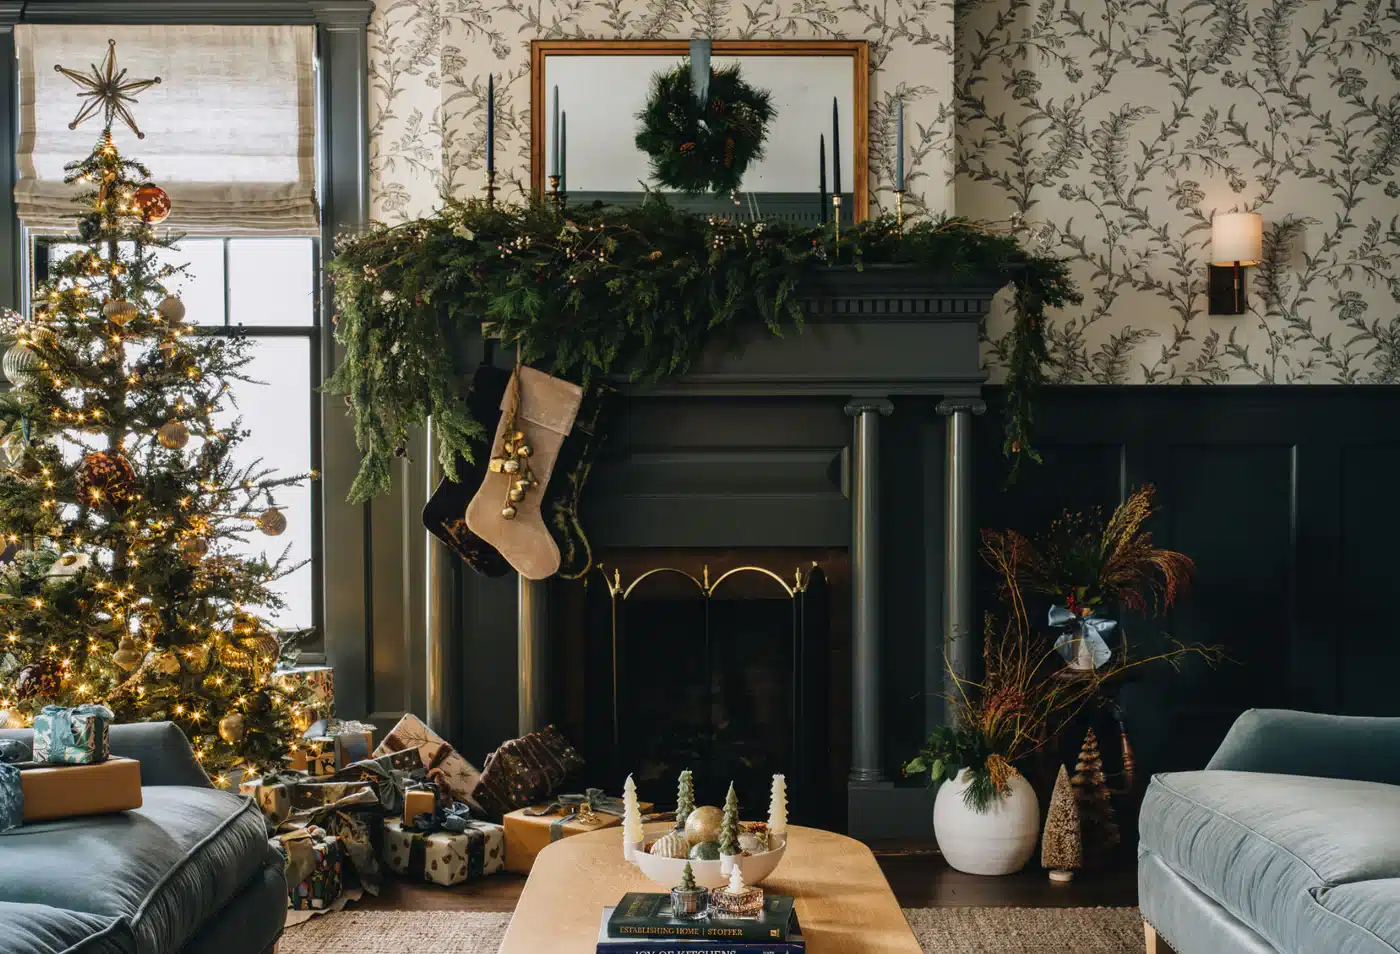  'Tis the season to be merry and bright, and nowhere is the holiday spirit more evident than in The Madison home of renowned interior designer Jean Stoffer. Stoffer PHotography Interiors